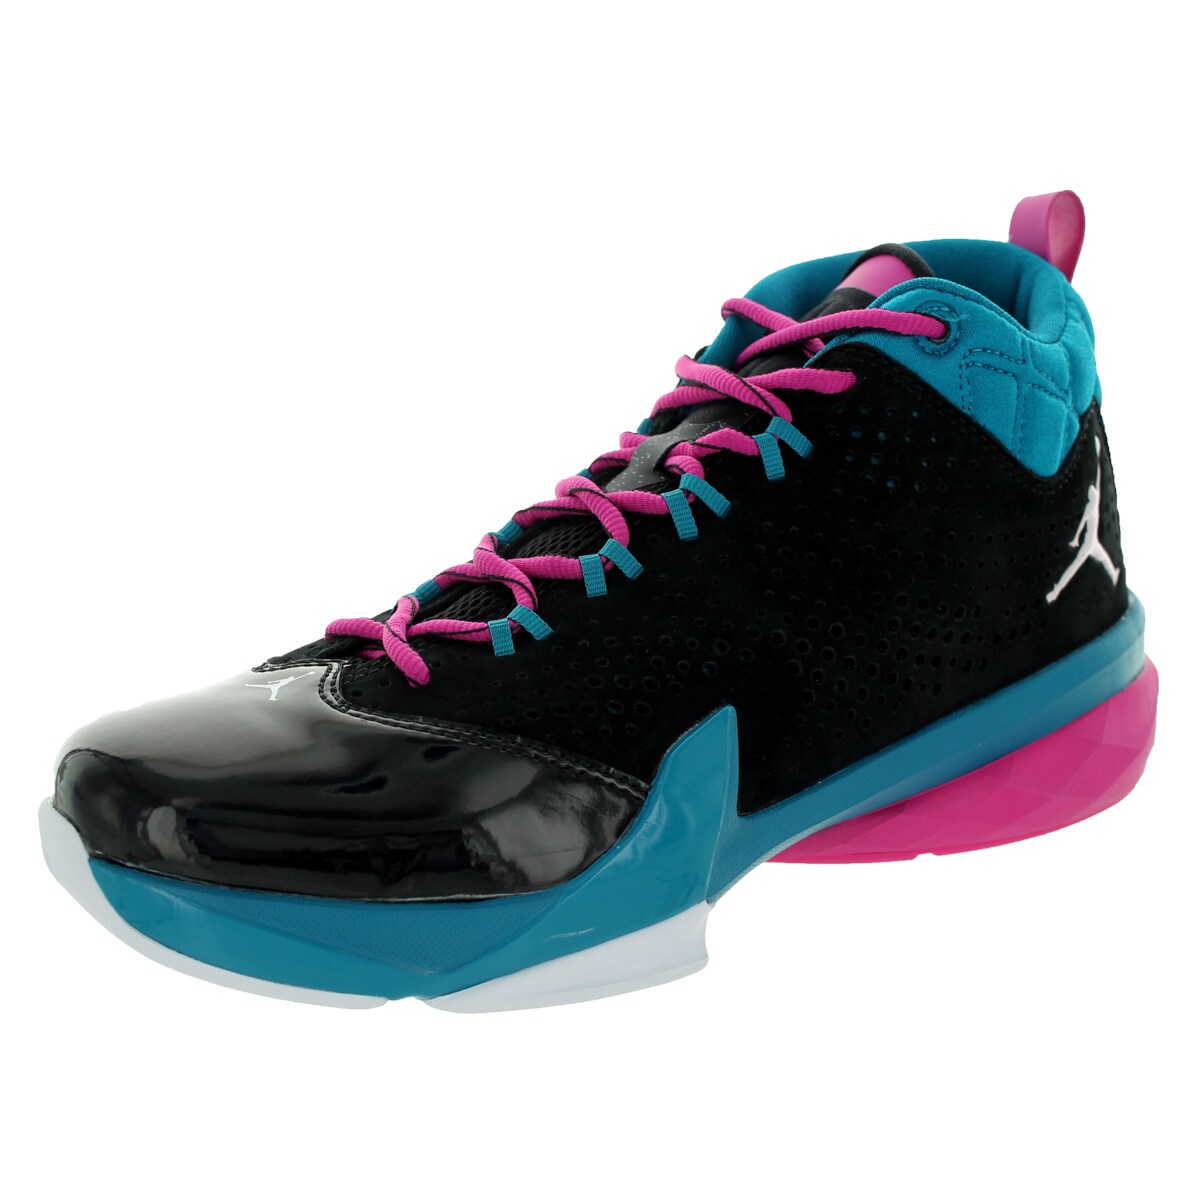 black and teal basketball shoes